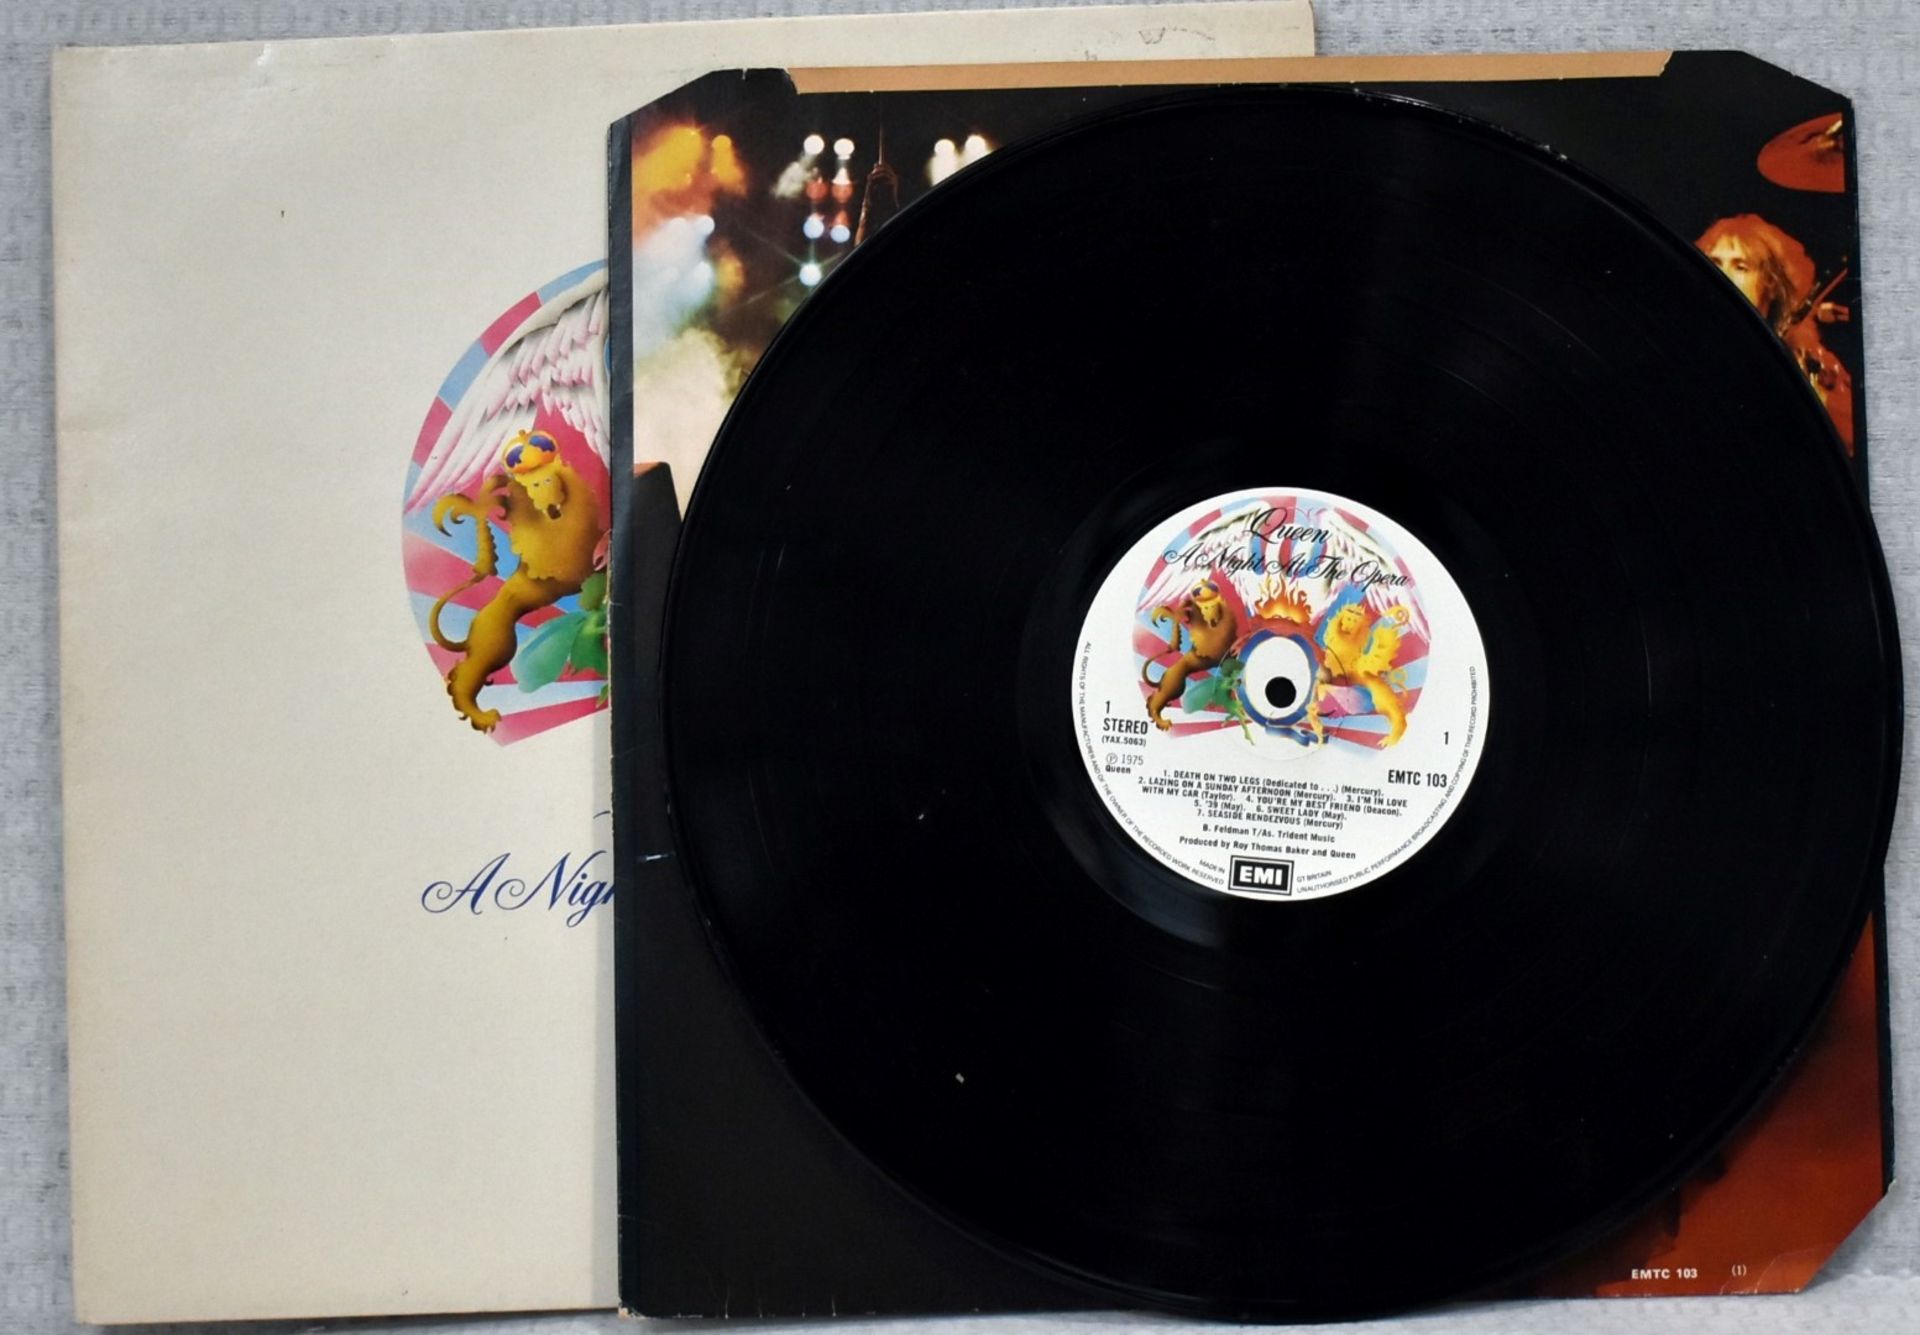 1 x QUEEN A Night At The Opera LP by EMI Records 1975 2 Sided 12 Inch Vinyl with Lyrics - Ref: - Image 15 of 21